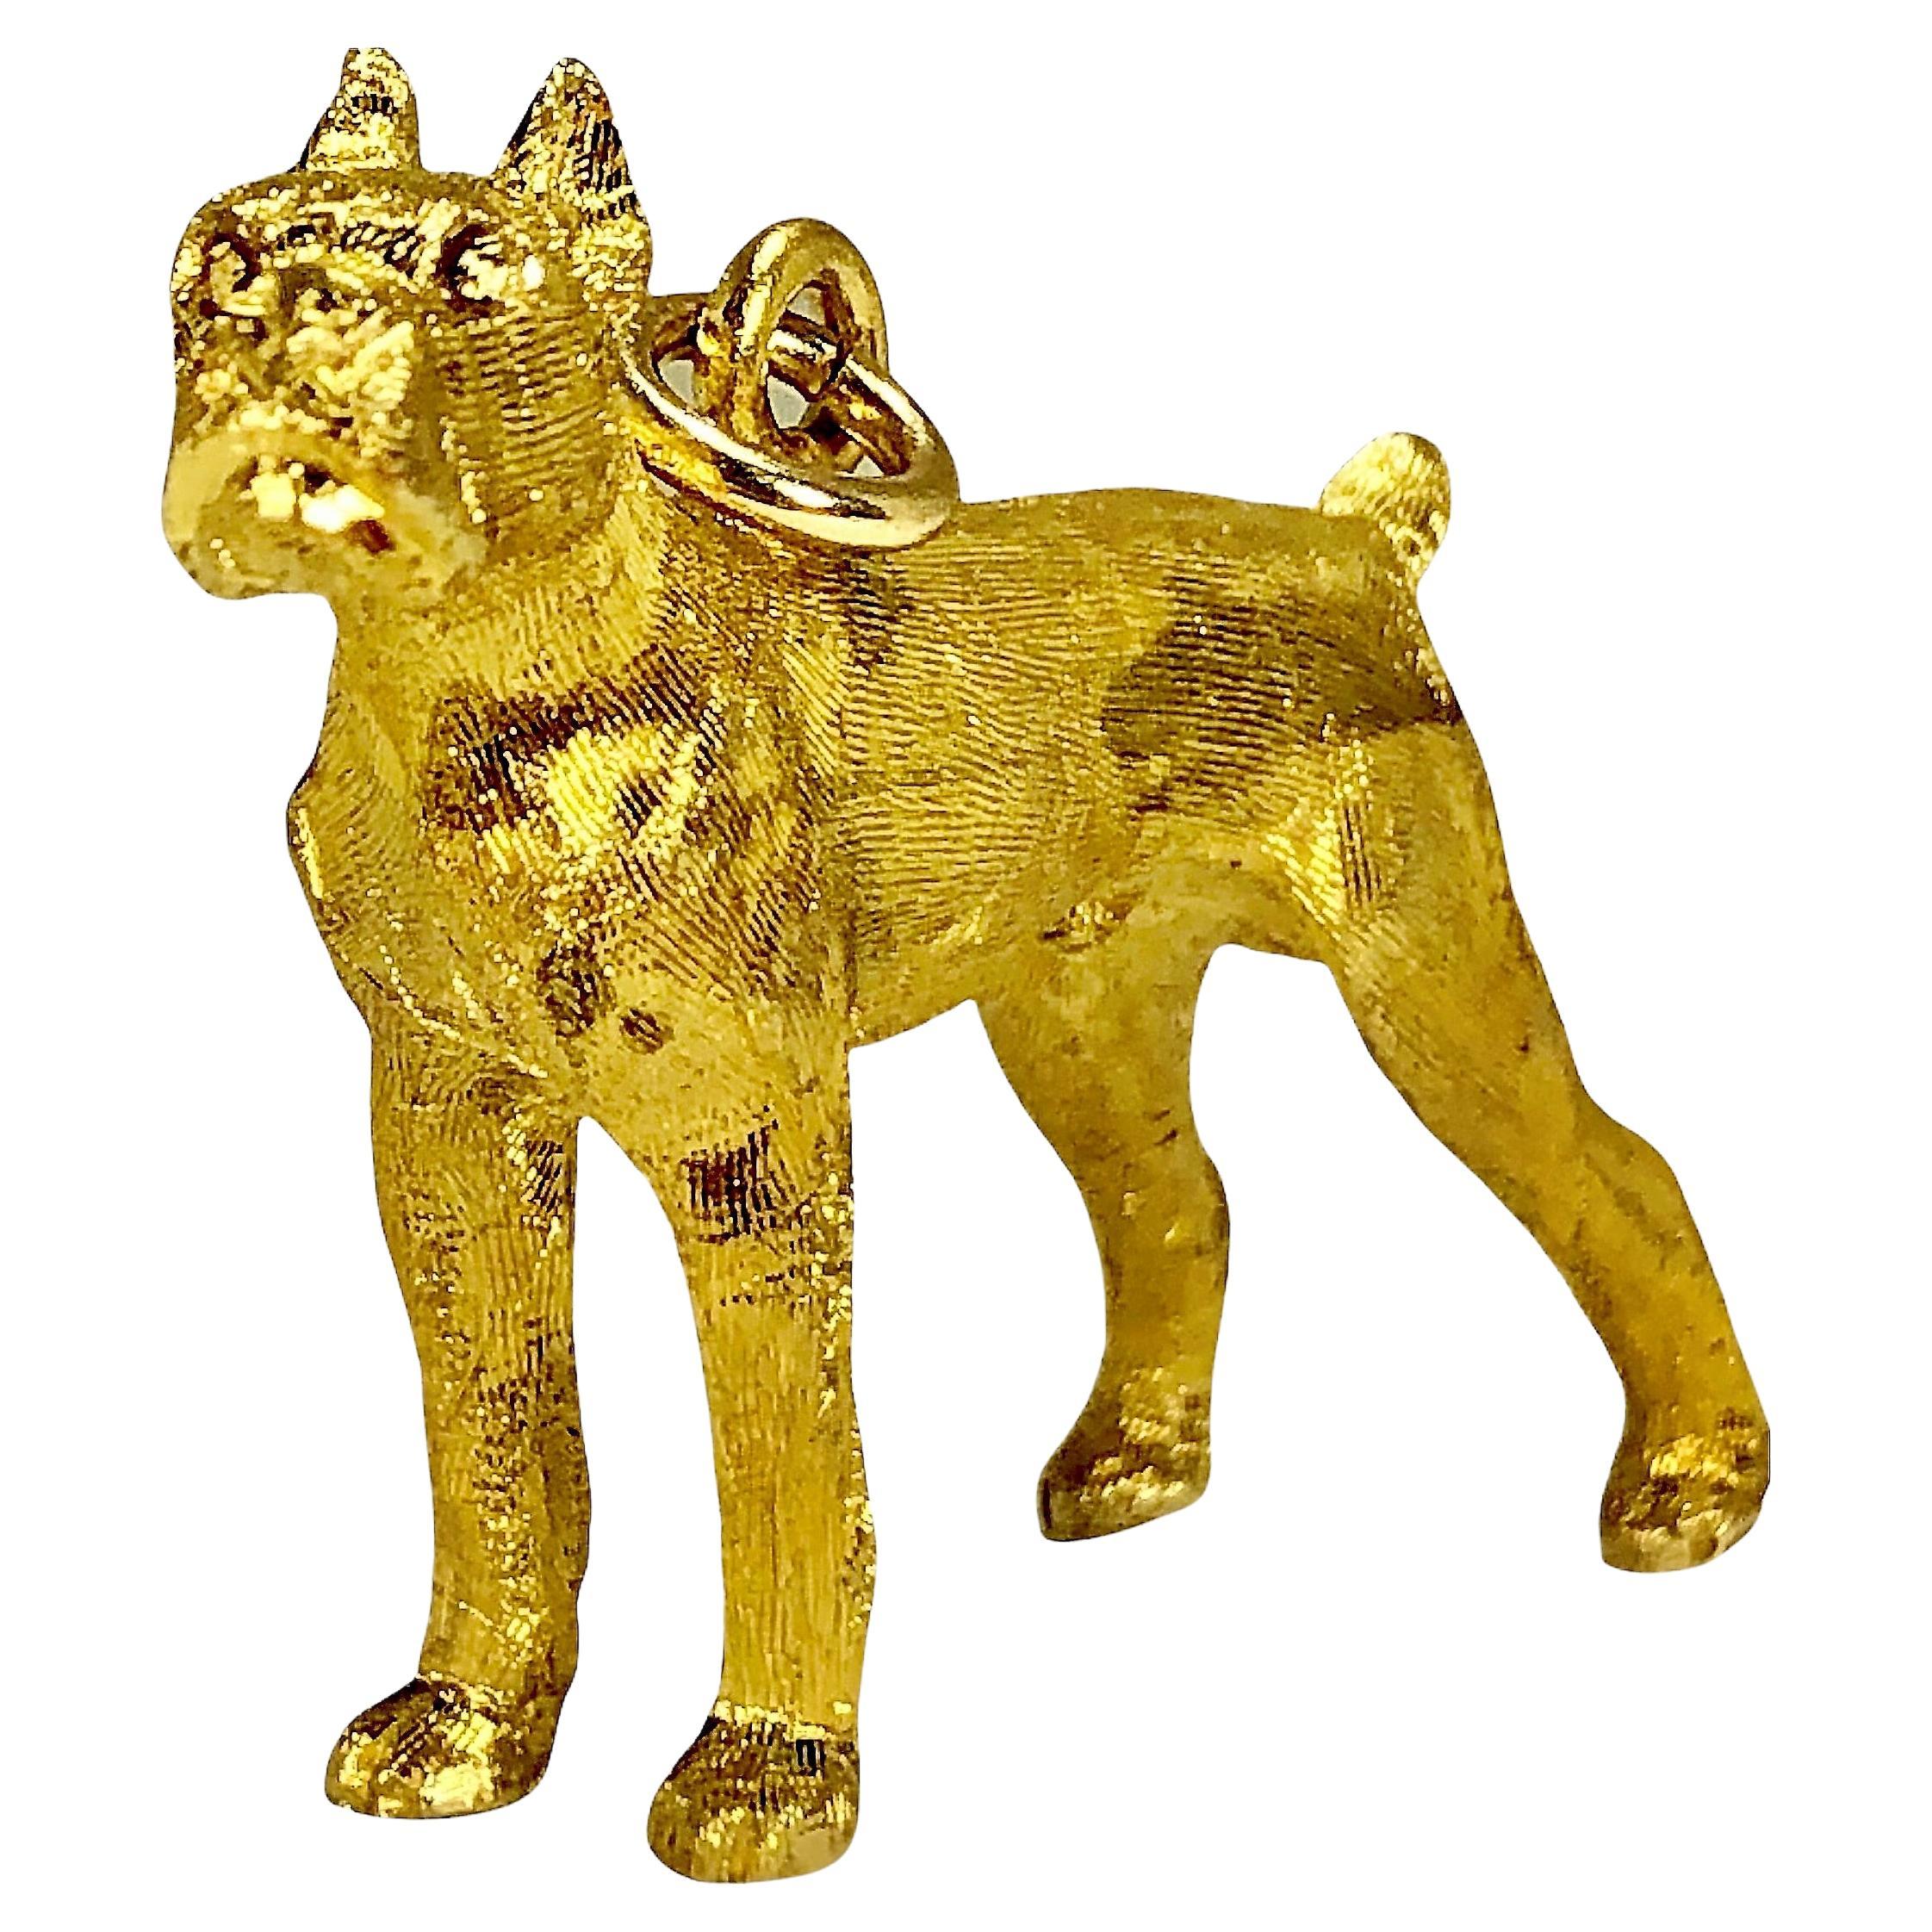 This large 14k gold, three dimensional American Boxer caricature pendant is very lifelike and is substantial; measuring 1 1/2 inches by 1 3/16 inches. The finish is an intricate Florentine which causes light hitting it to shimmer and the entire